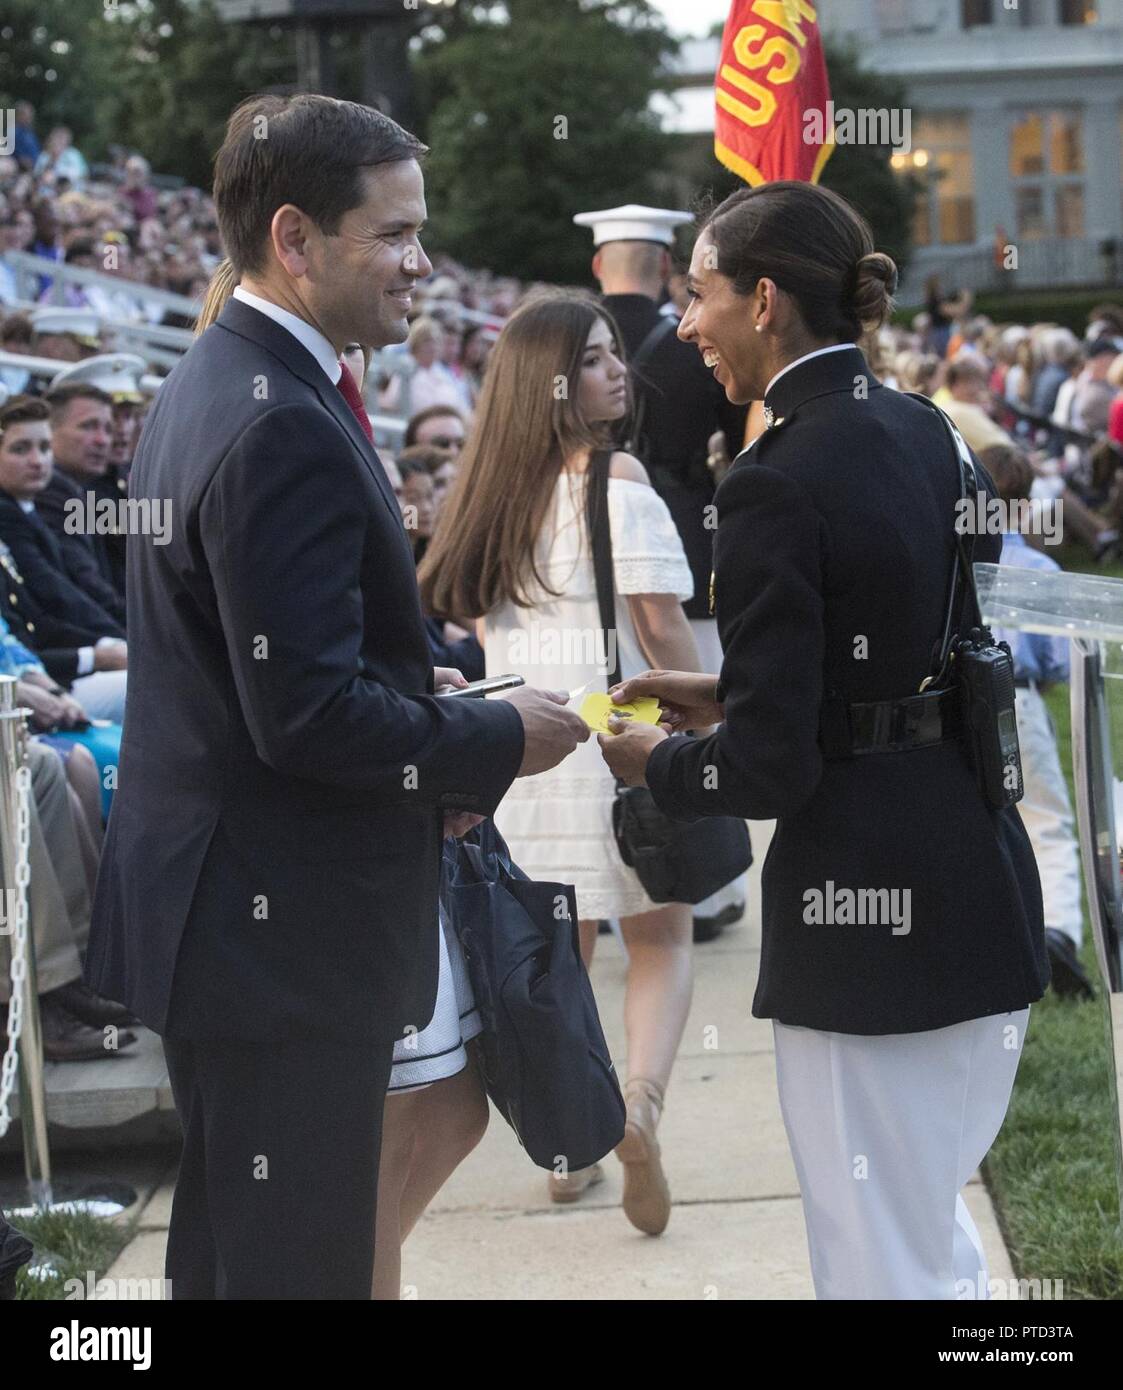 Captain Desiree K. Sanchez, protocol director, Marine Barracks Washington D.C., escorts the Honorable Marco Rubio, United States Senator for Florida, and his wife, Mrs. Jeanette Dousdebes Rubio, to their seats before a Friday Evening Parade at the Barracks, July 7, 2017. The guest of honor for the parade was Mr. Timothy Day, chairman and founder of Bar-S Foods Company and chairman of the Timothy T. Day Foundation, and the hosting official was Lt. Gen. Kenneth McKenzie, director for Strategic Plans and Policy. Stock Photo